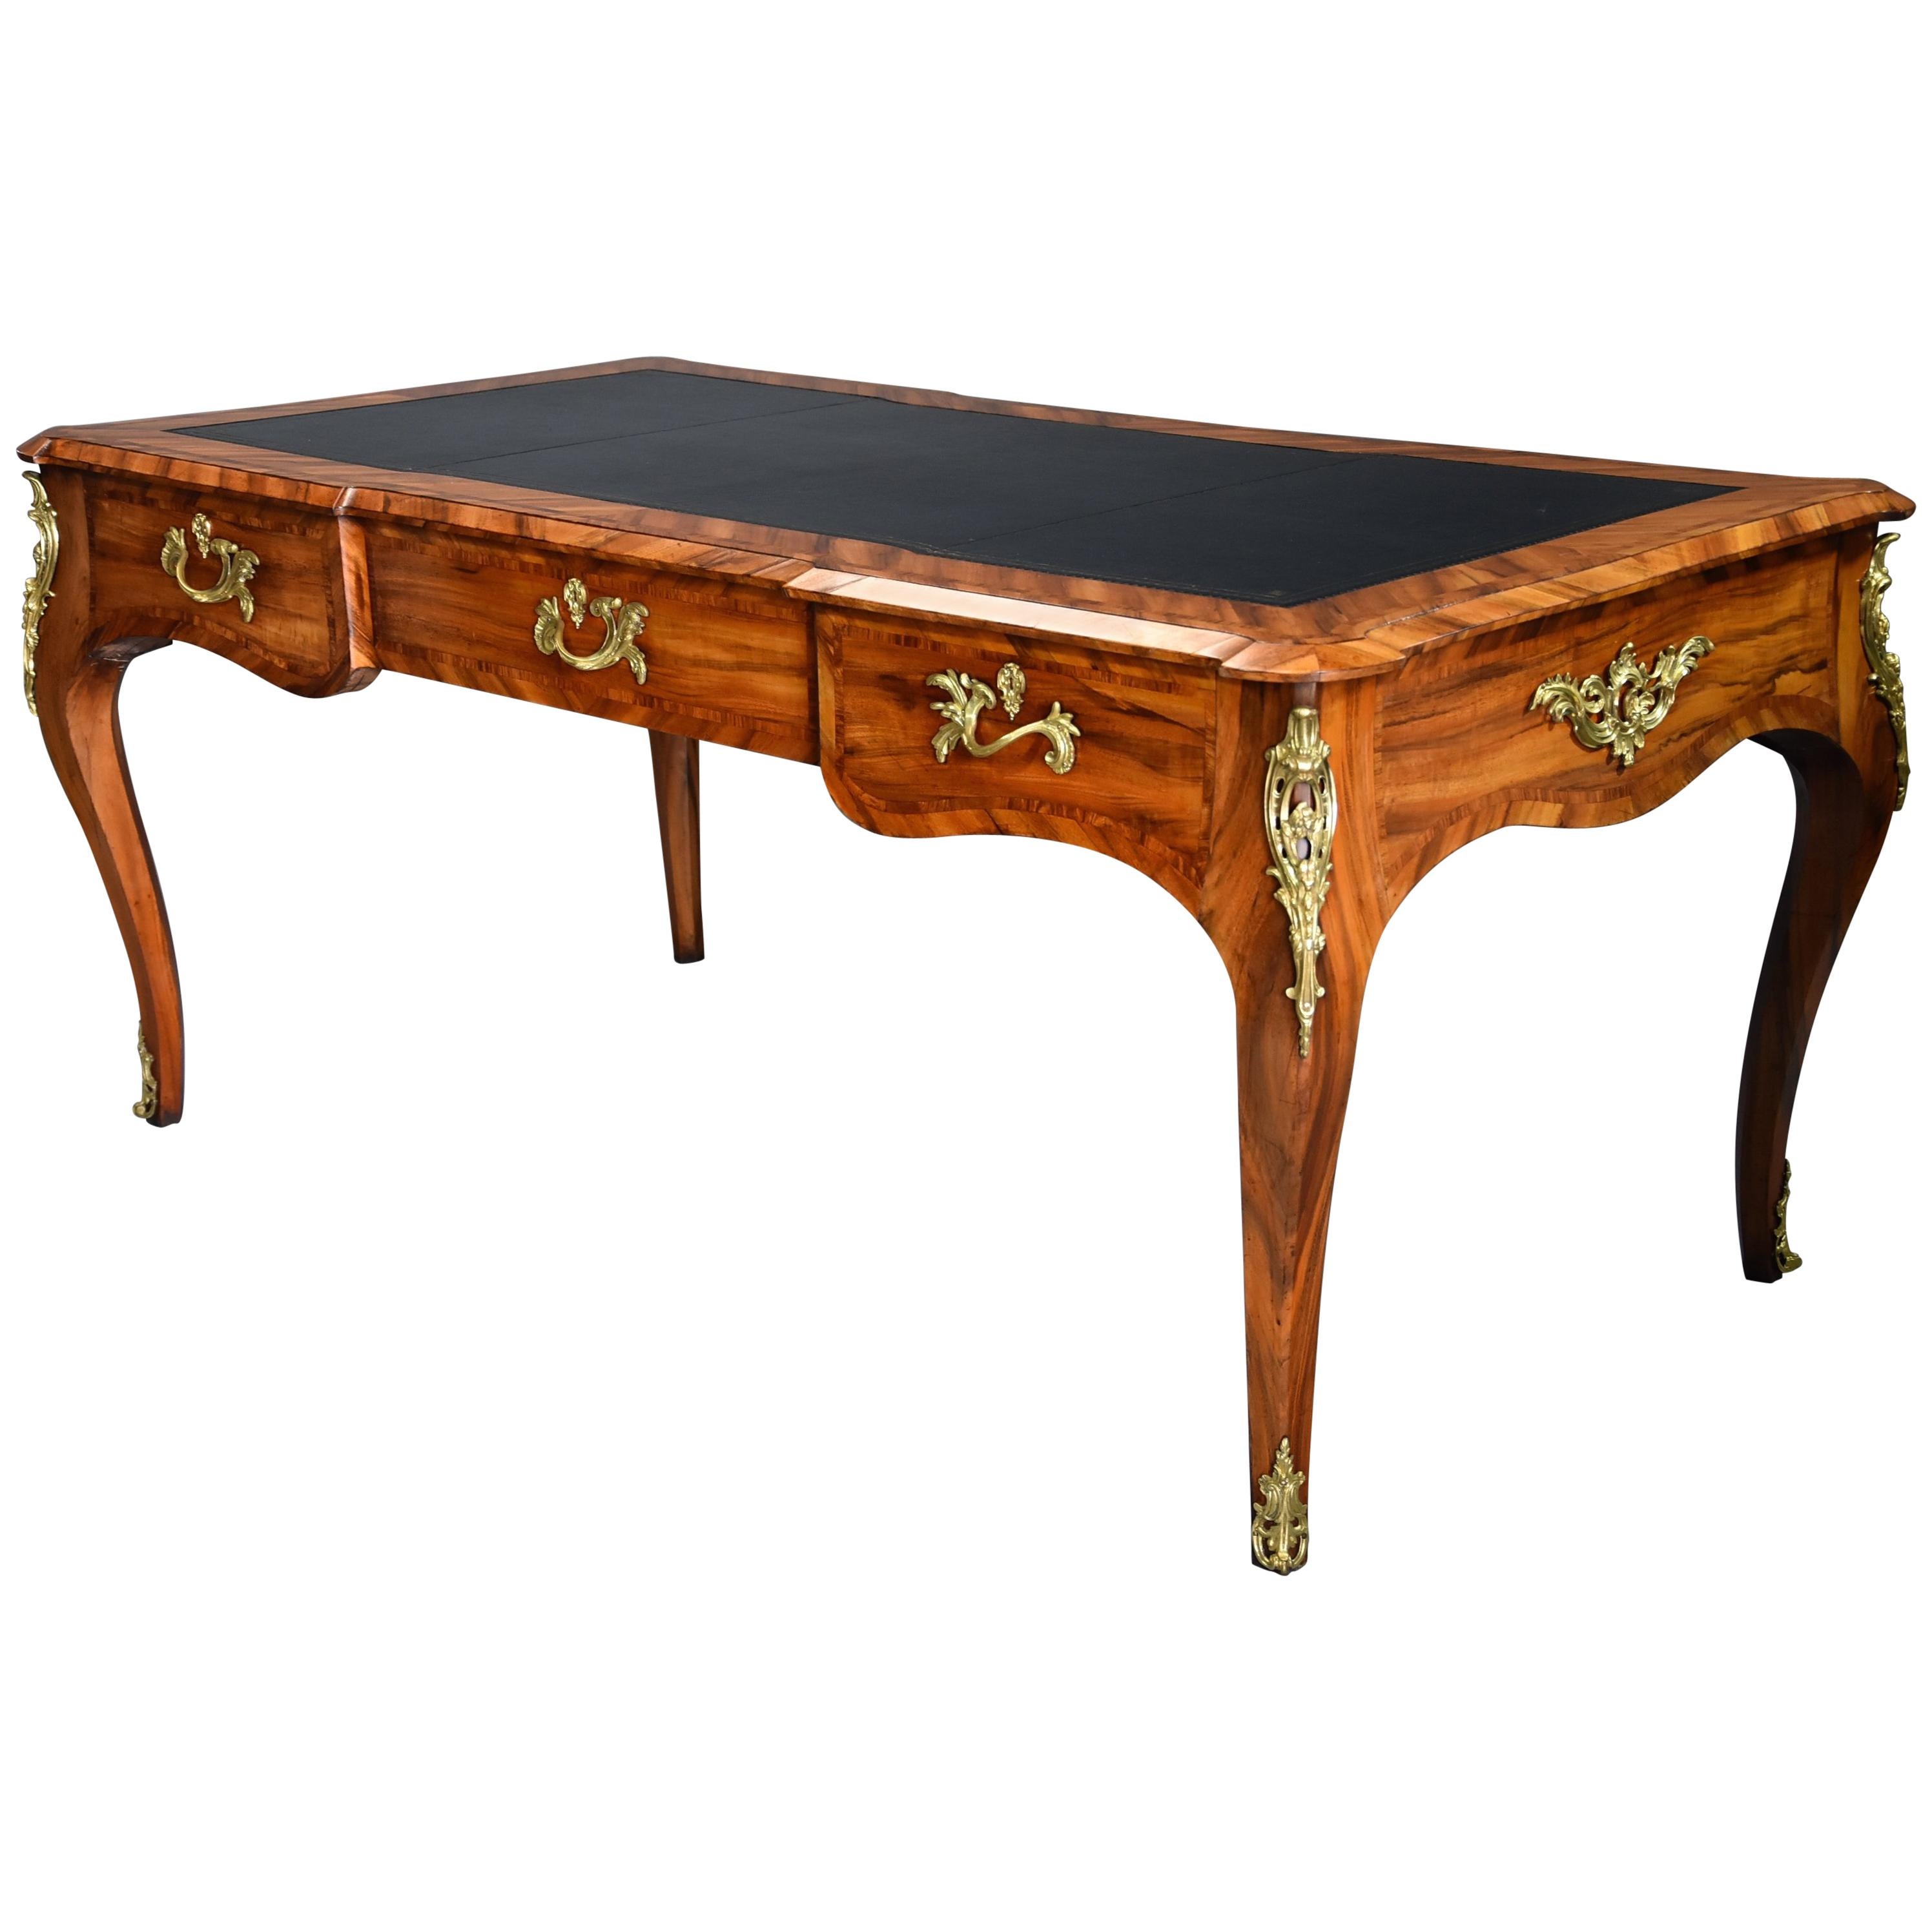 Fine Quality Mid-19th Century Goncalo Alves Bureau Plat in the French Style For Sale